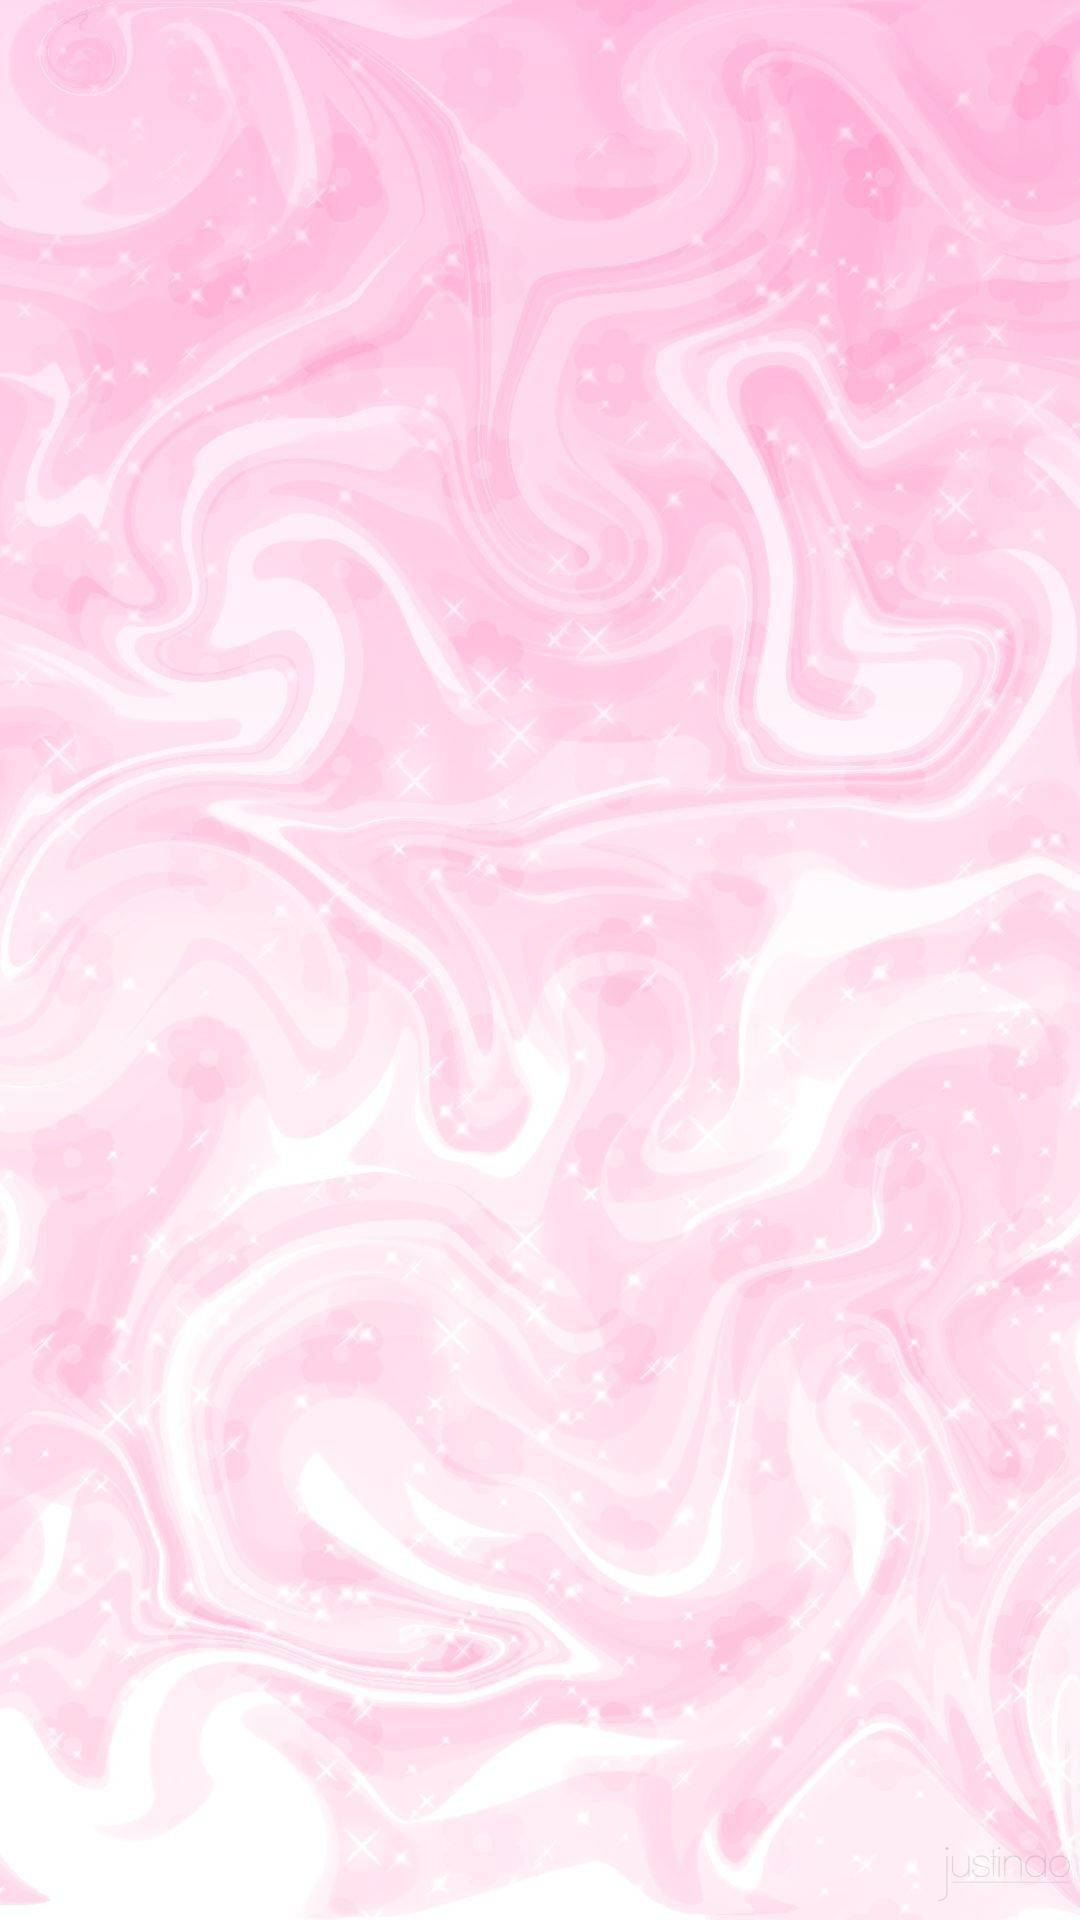 Luxurious Pink Marble Texture With Wavy Patterns